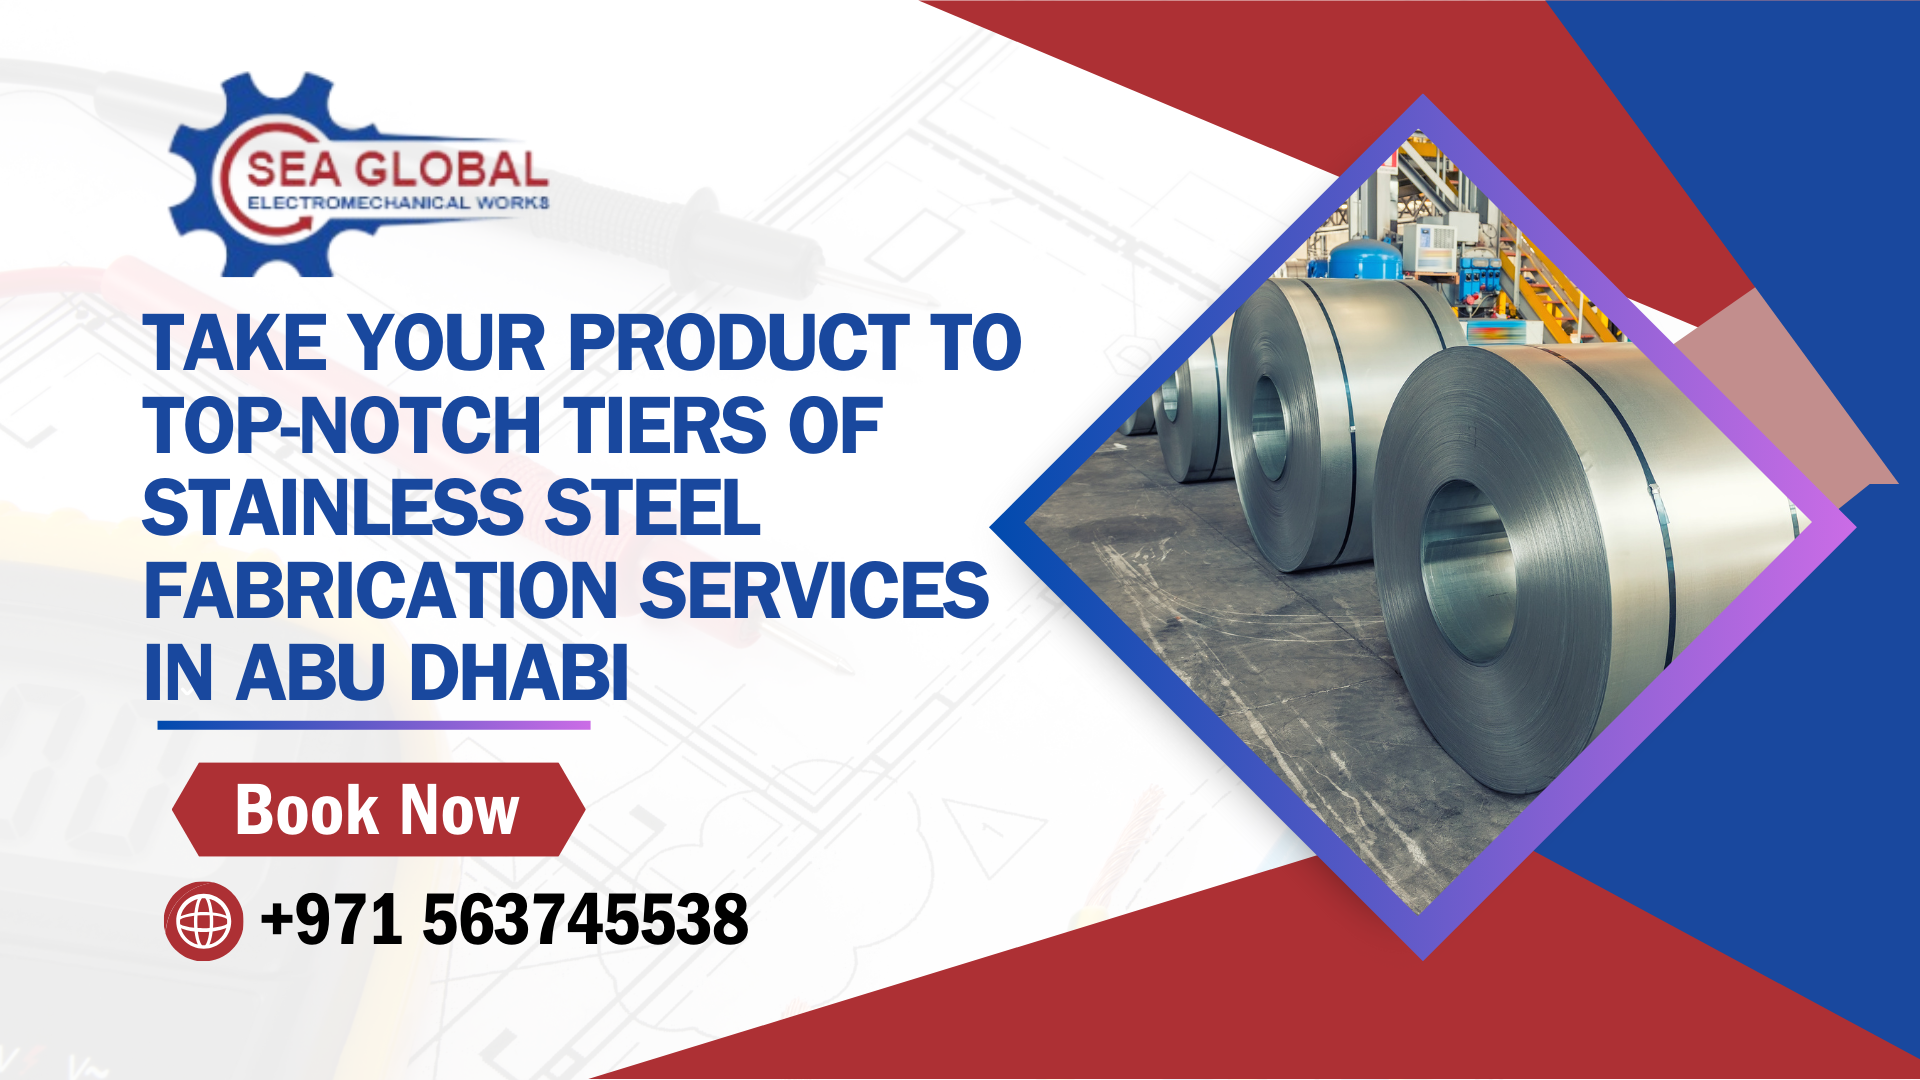 Take Your Product to Top-notch Tiers of Stainless Steel Fabrication Services in Abu Dhabi